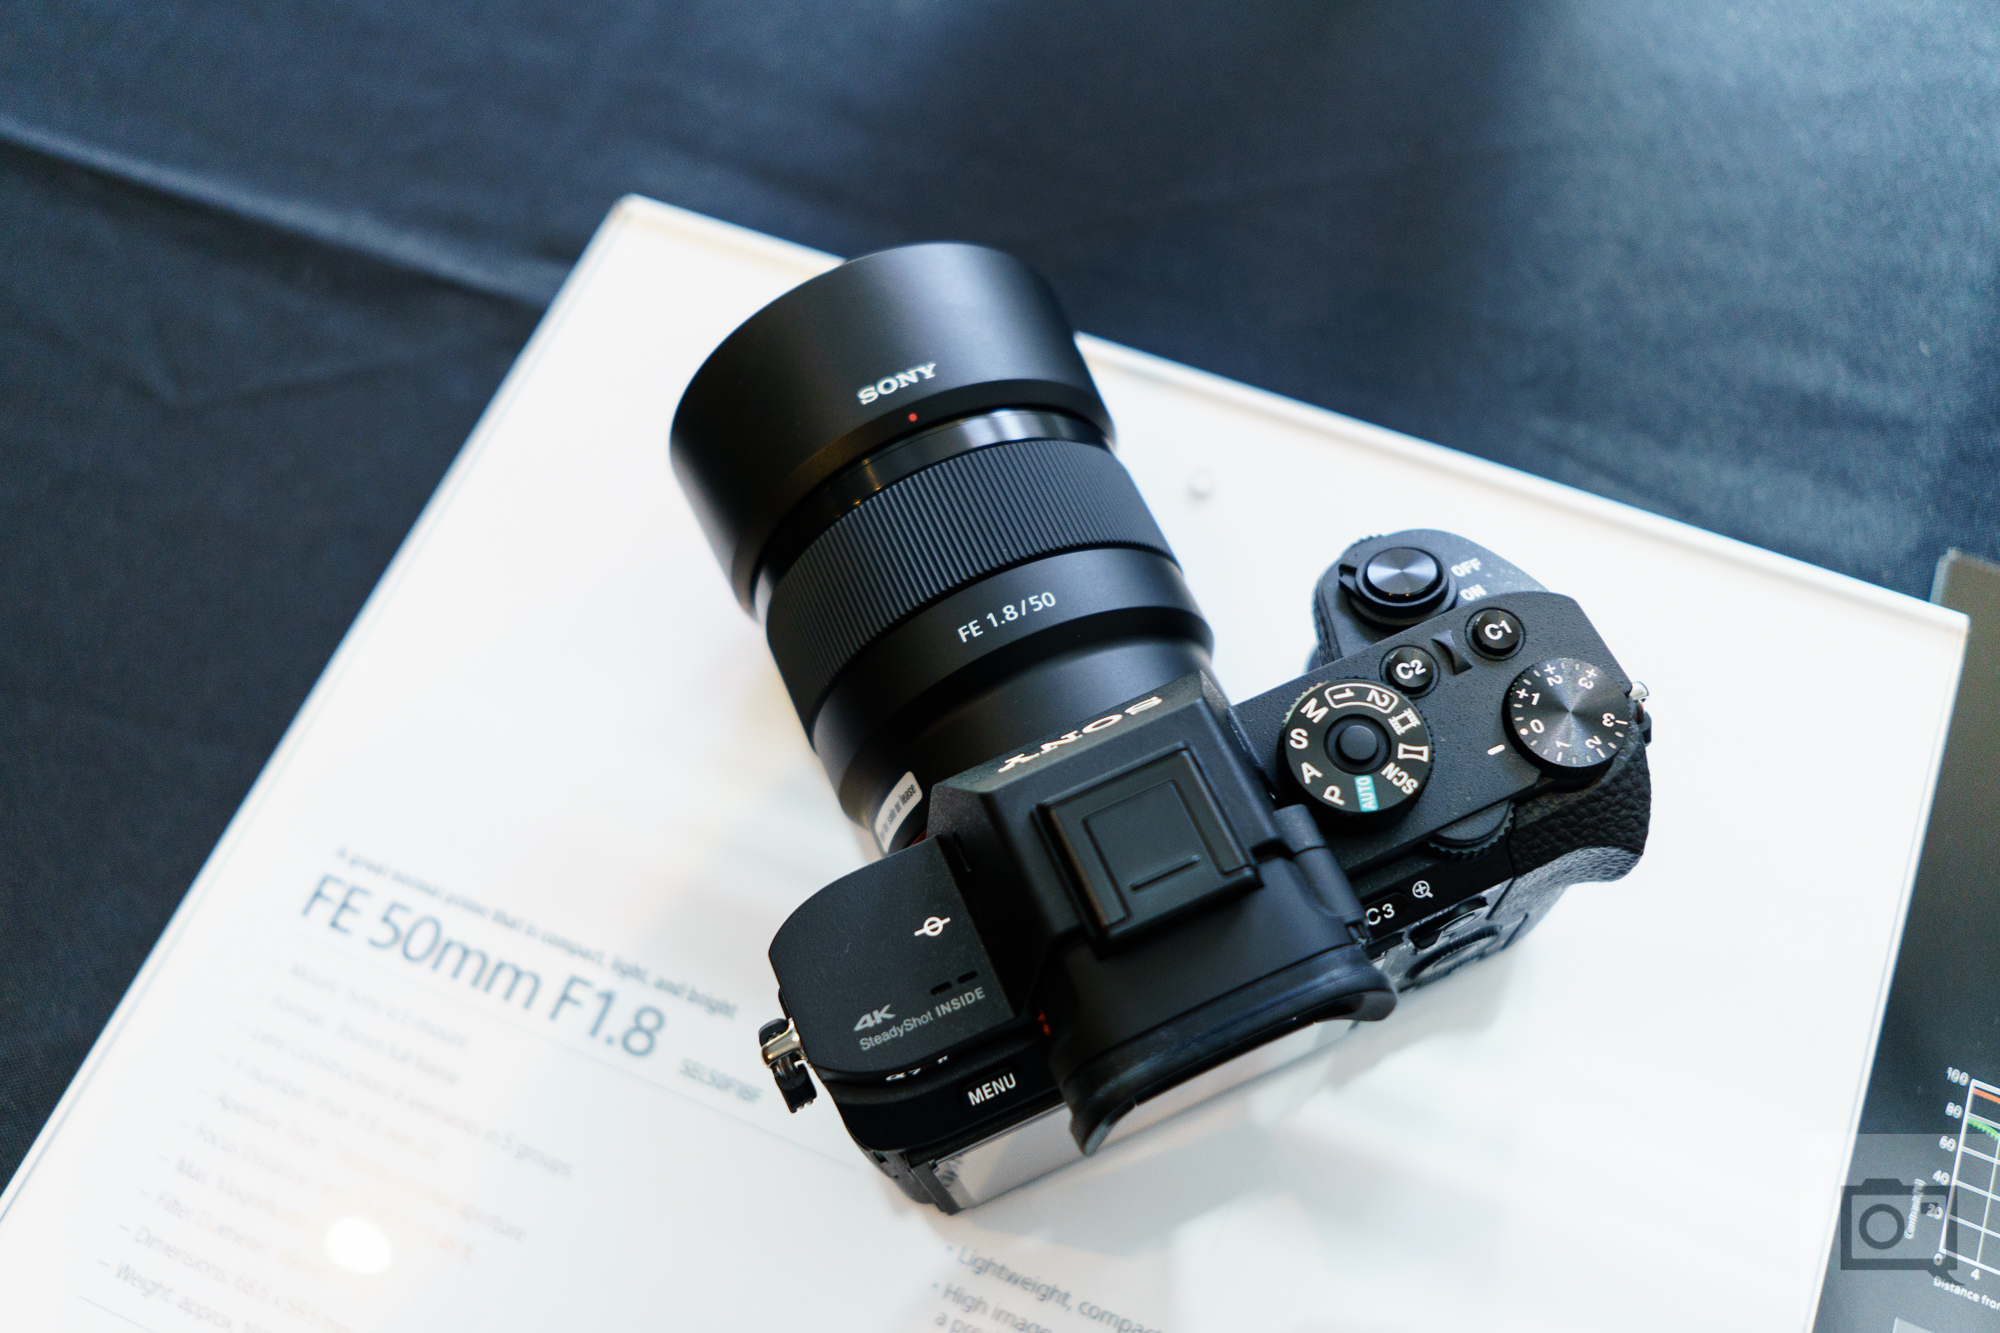 Sony FE 50mm F1.8 Review